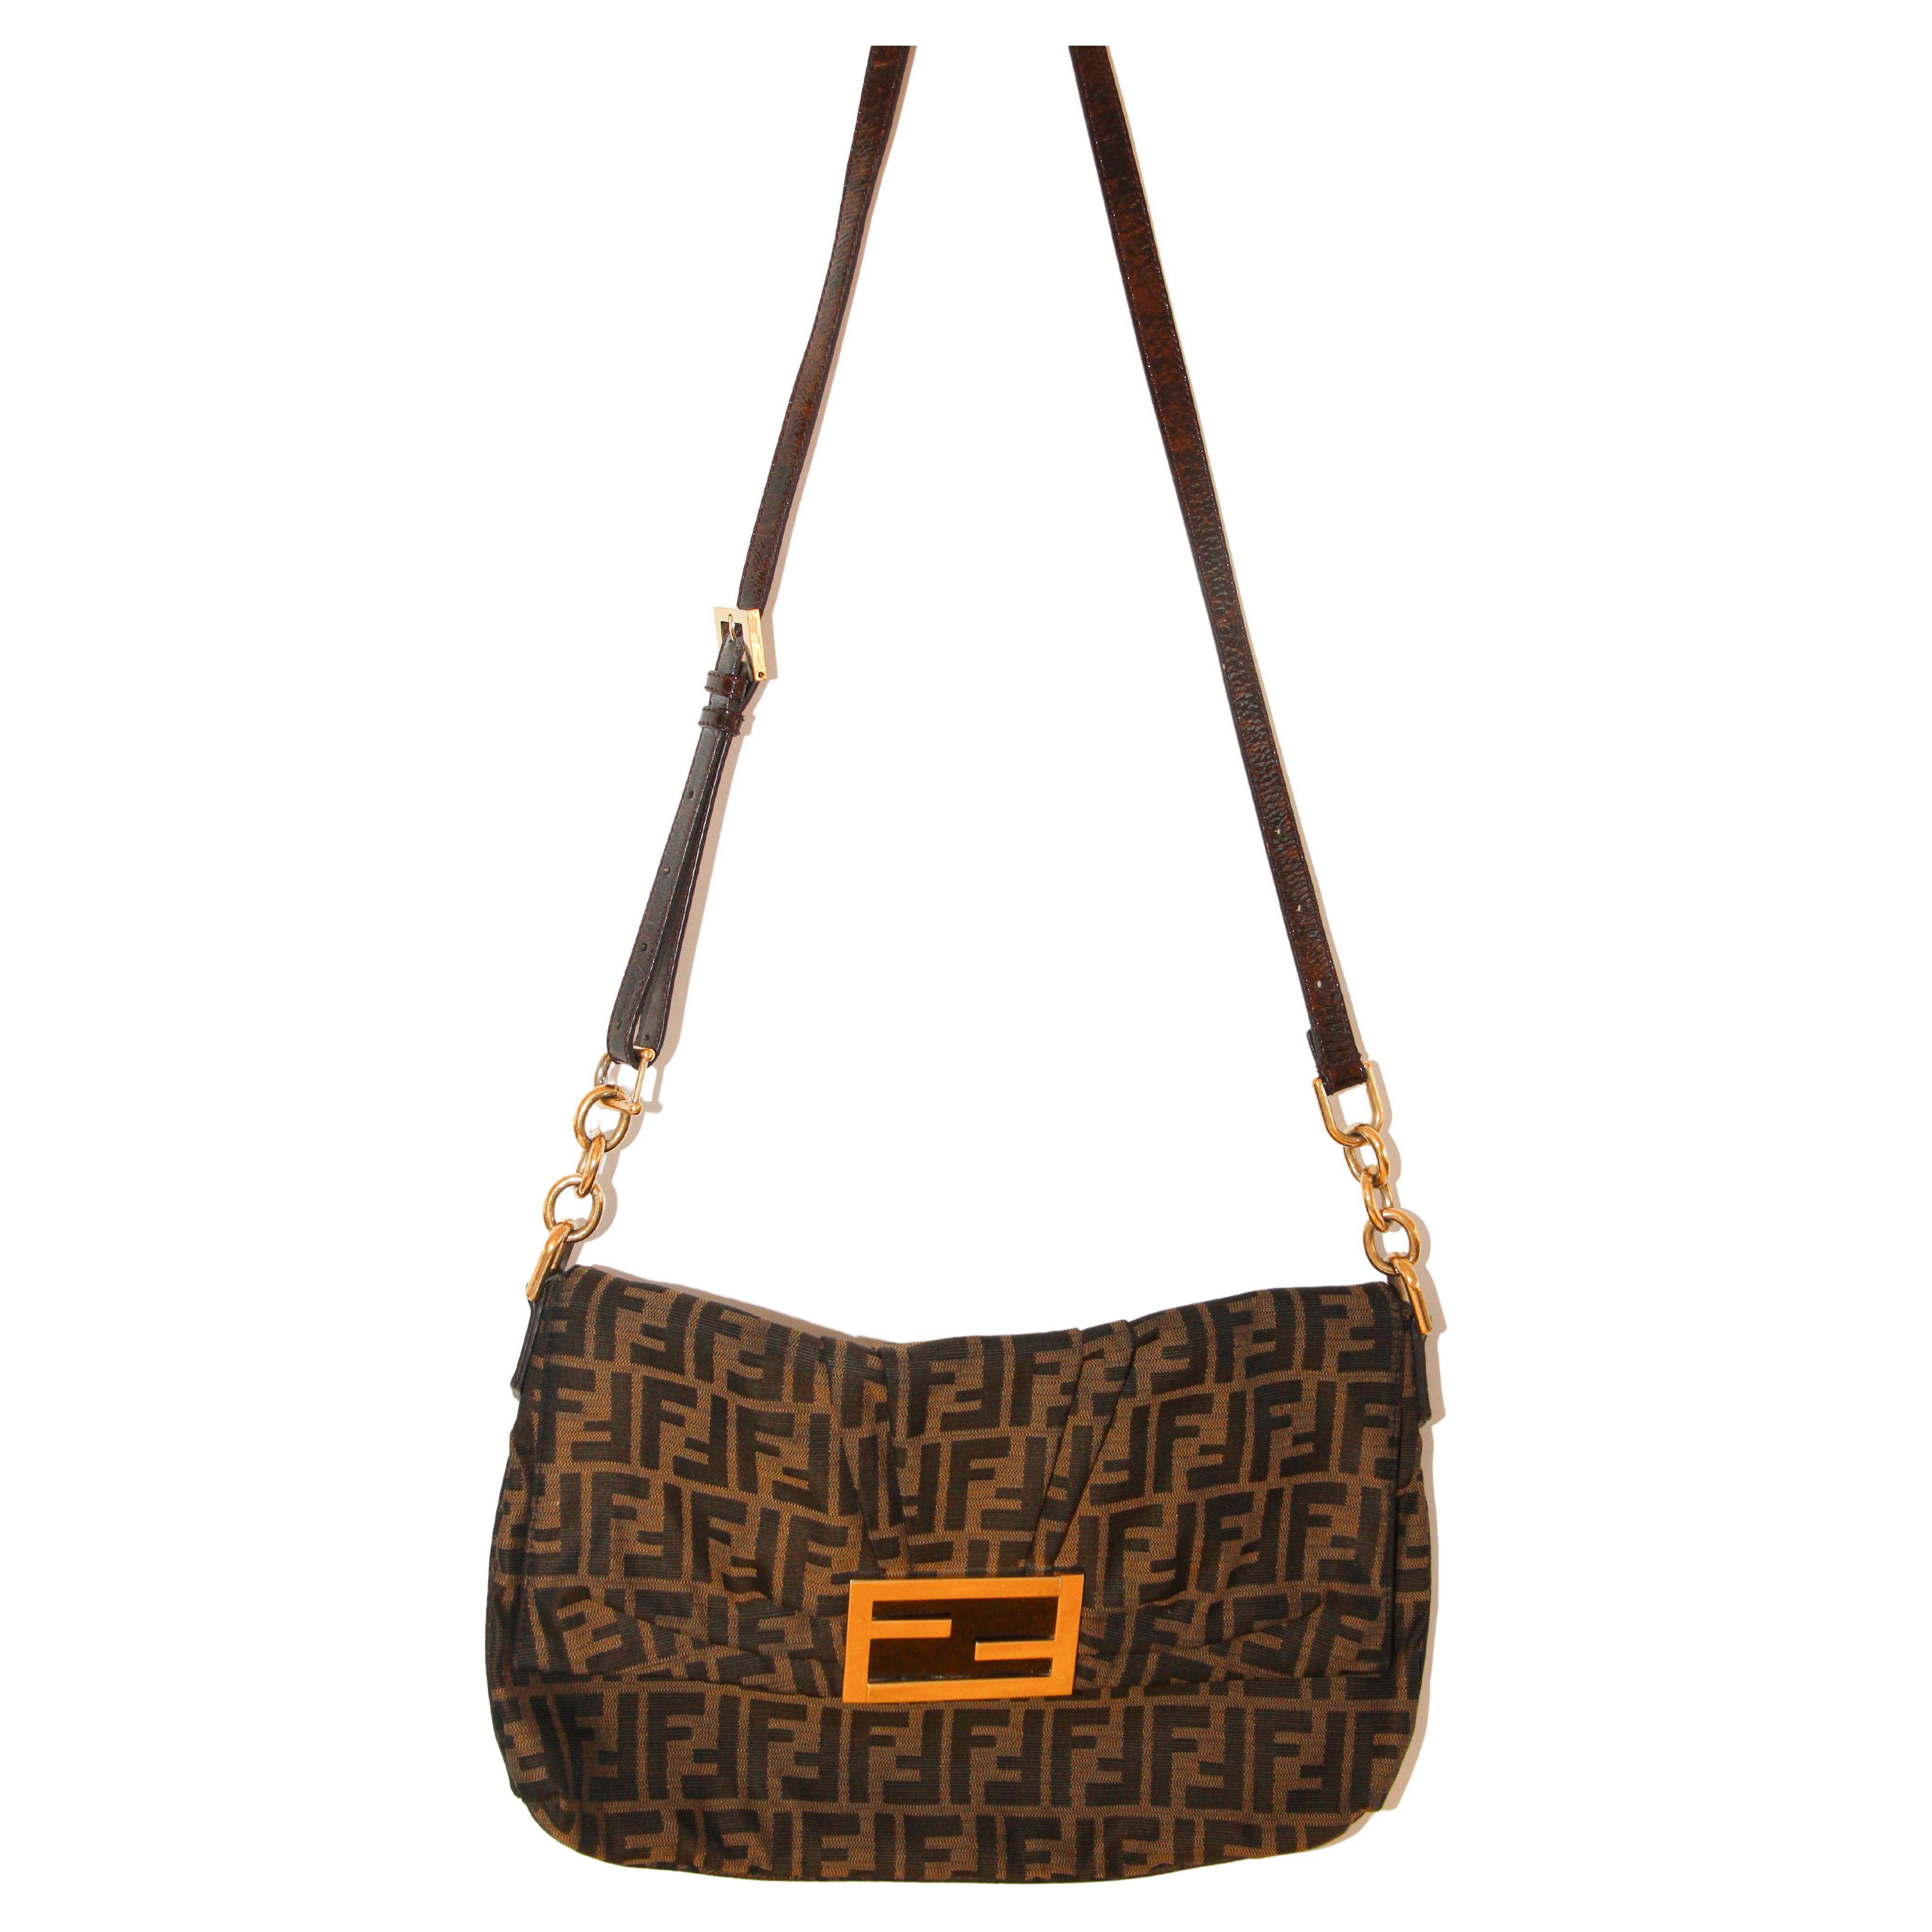 Fendi Tobacco Zucca Canvas and Patent Leather Mia Flap Handbag.
Complete a winning look with this Mia handbag from Fendi. Crafted from Zucca coated canvas and patent leather, the front comes with a striking gold-tone F and the top reveals a spacious